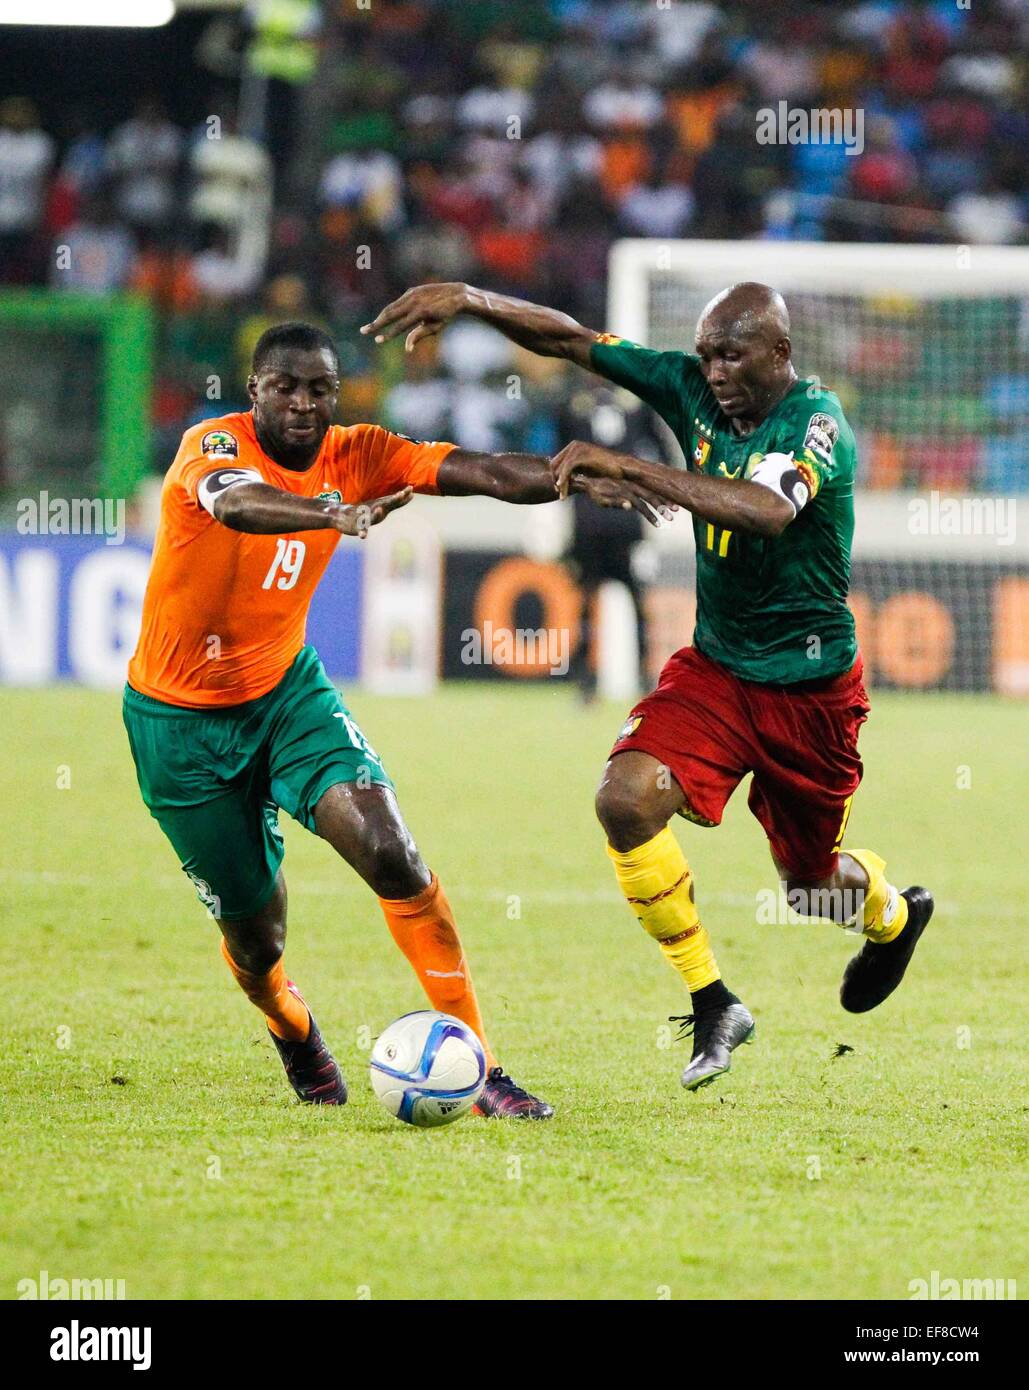 Malabo, Equatorial Guinea. 28th Jan, 2015. Stephane Mbia Etoundi (R) of Cameroon vies with Yaya Toure of Cote d'Ivoire during their group match of Africa Cup of Nations at the Stadium of Malabo, Equatorial Guinea, Jan. 28, 2015. Cameroon lost 0-1. Credit:  Li Jing/Xinhua/Alamy Live News Stock Photo